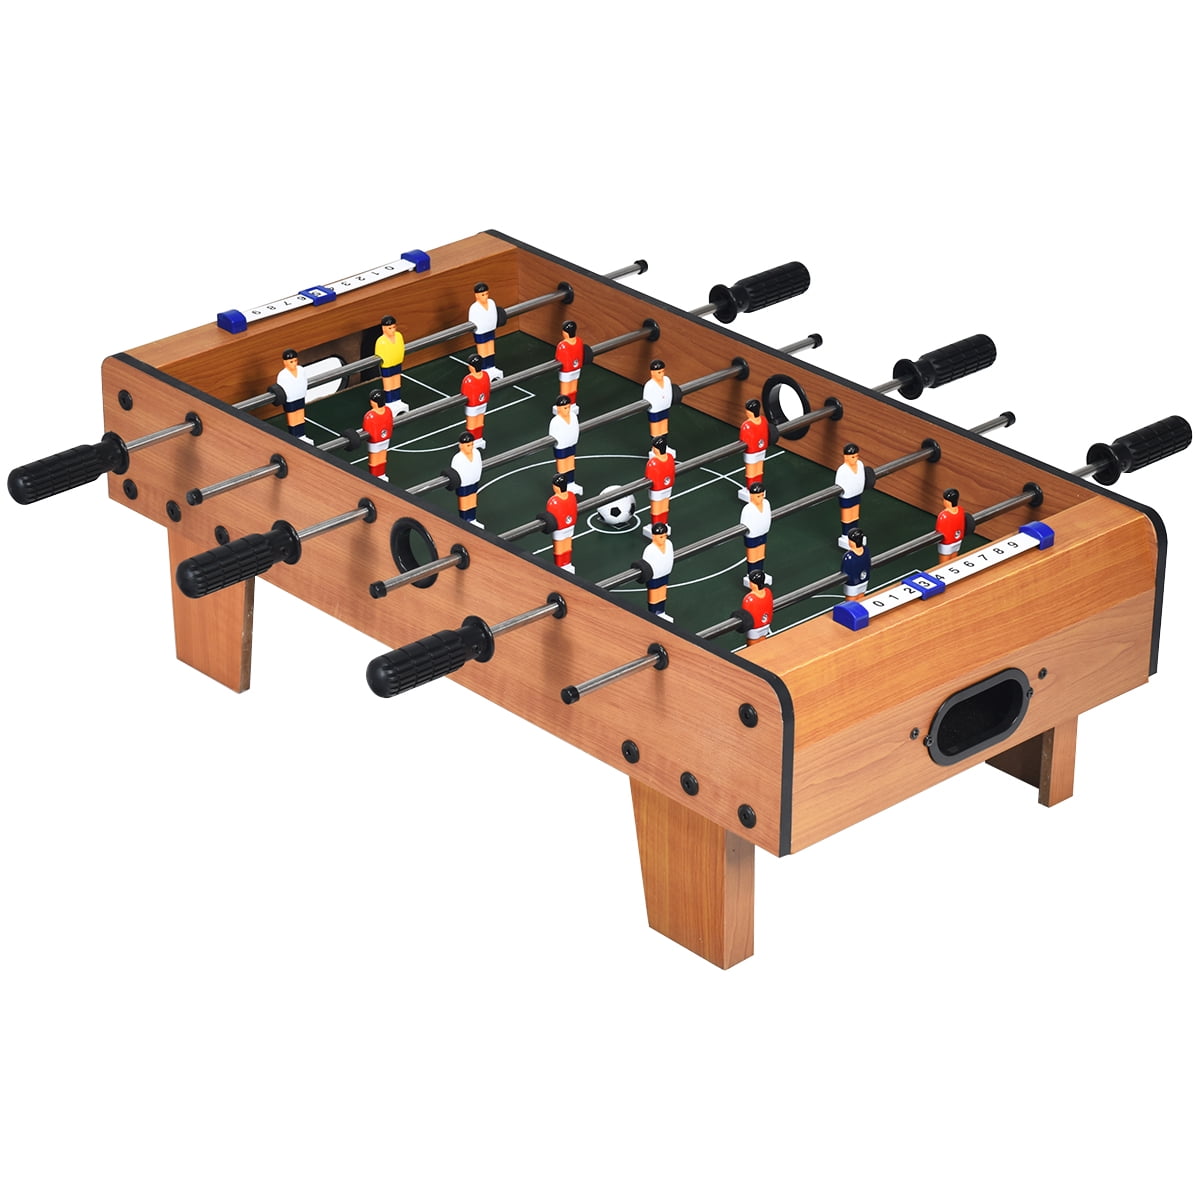 27" Indoor Foosball Table Competition Game Room Soccer football Sports w/ Legs 